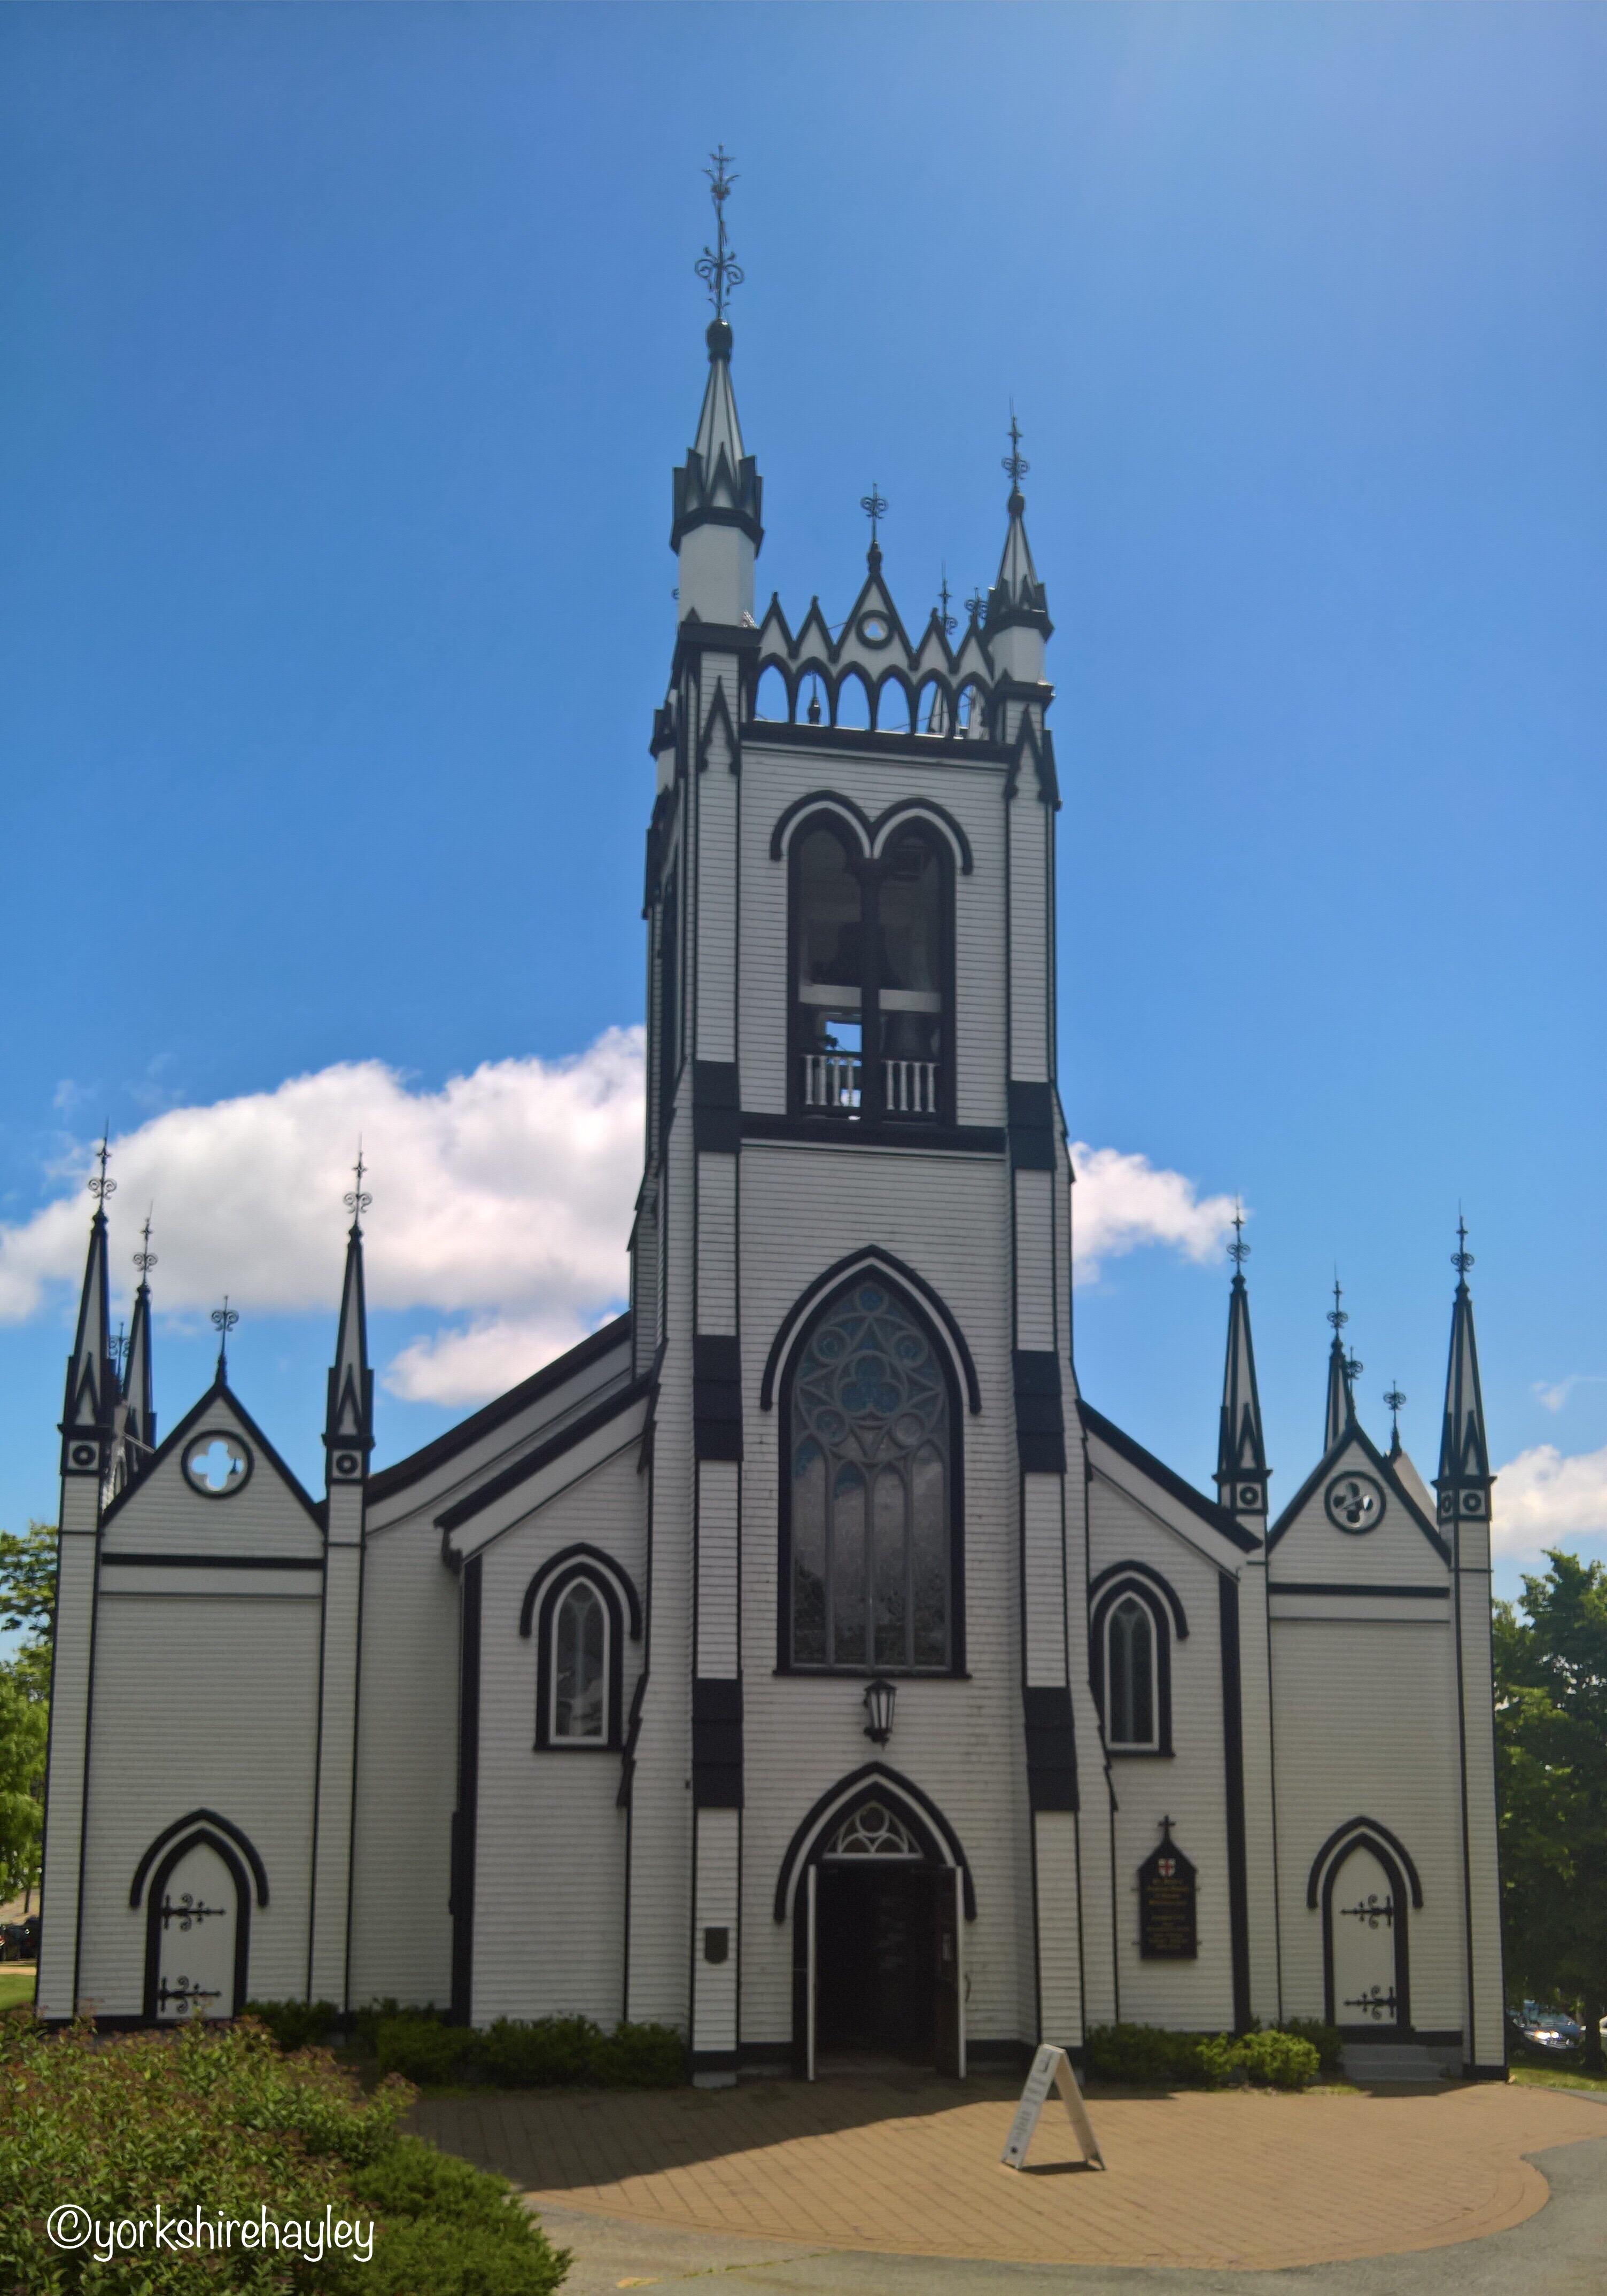 The Anglican Cathedral of St John in Lunenburg